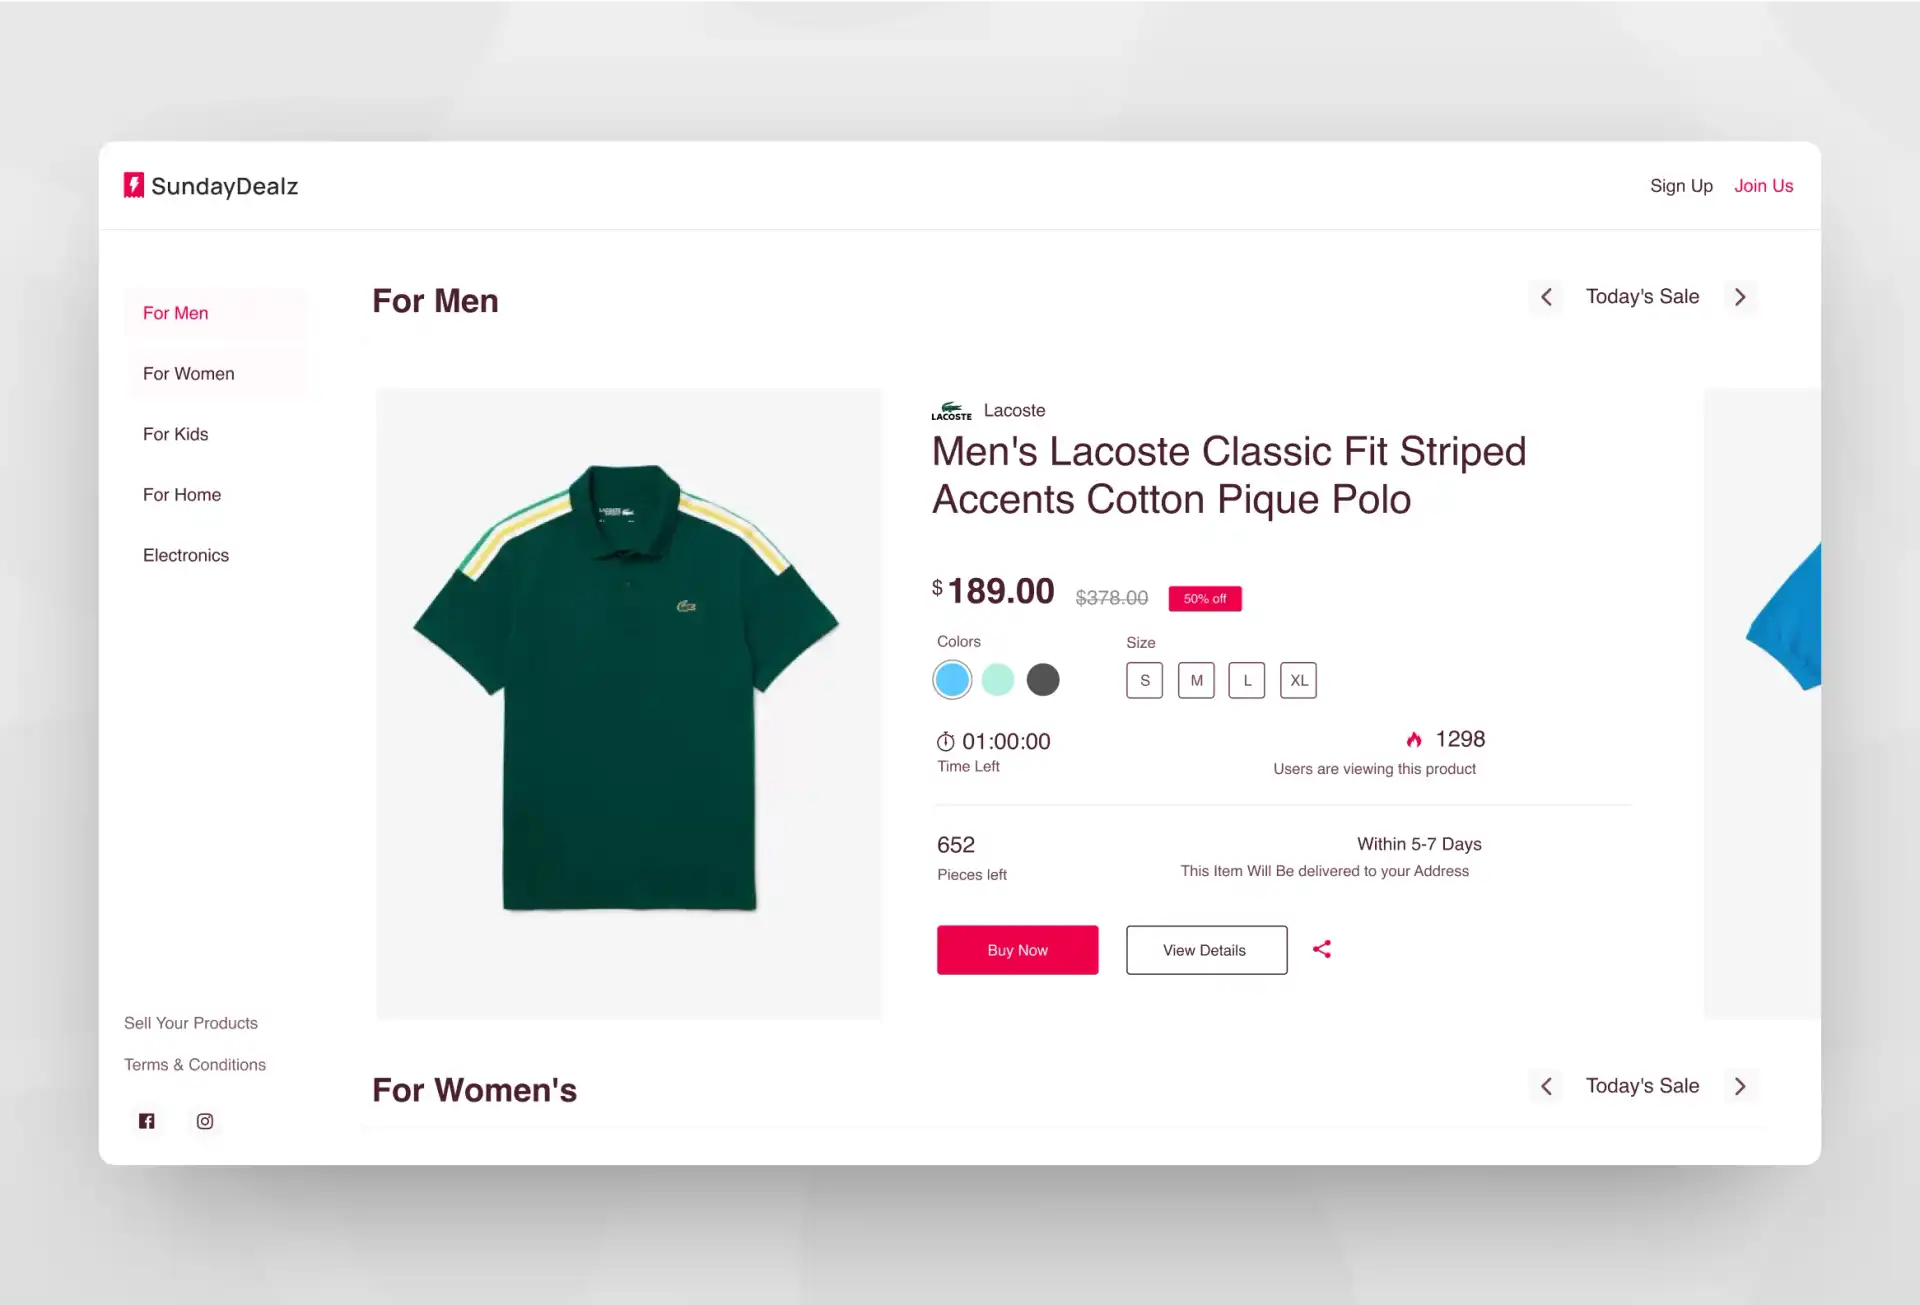 UI screen of men's product page